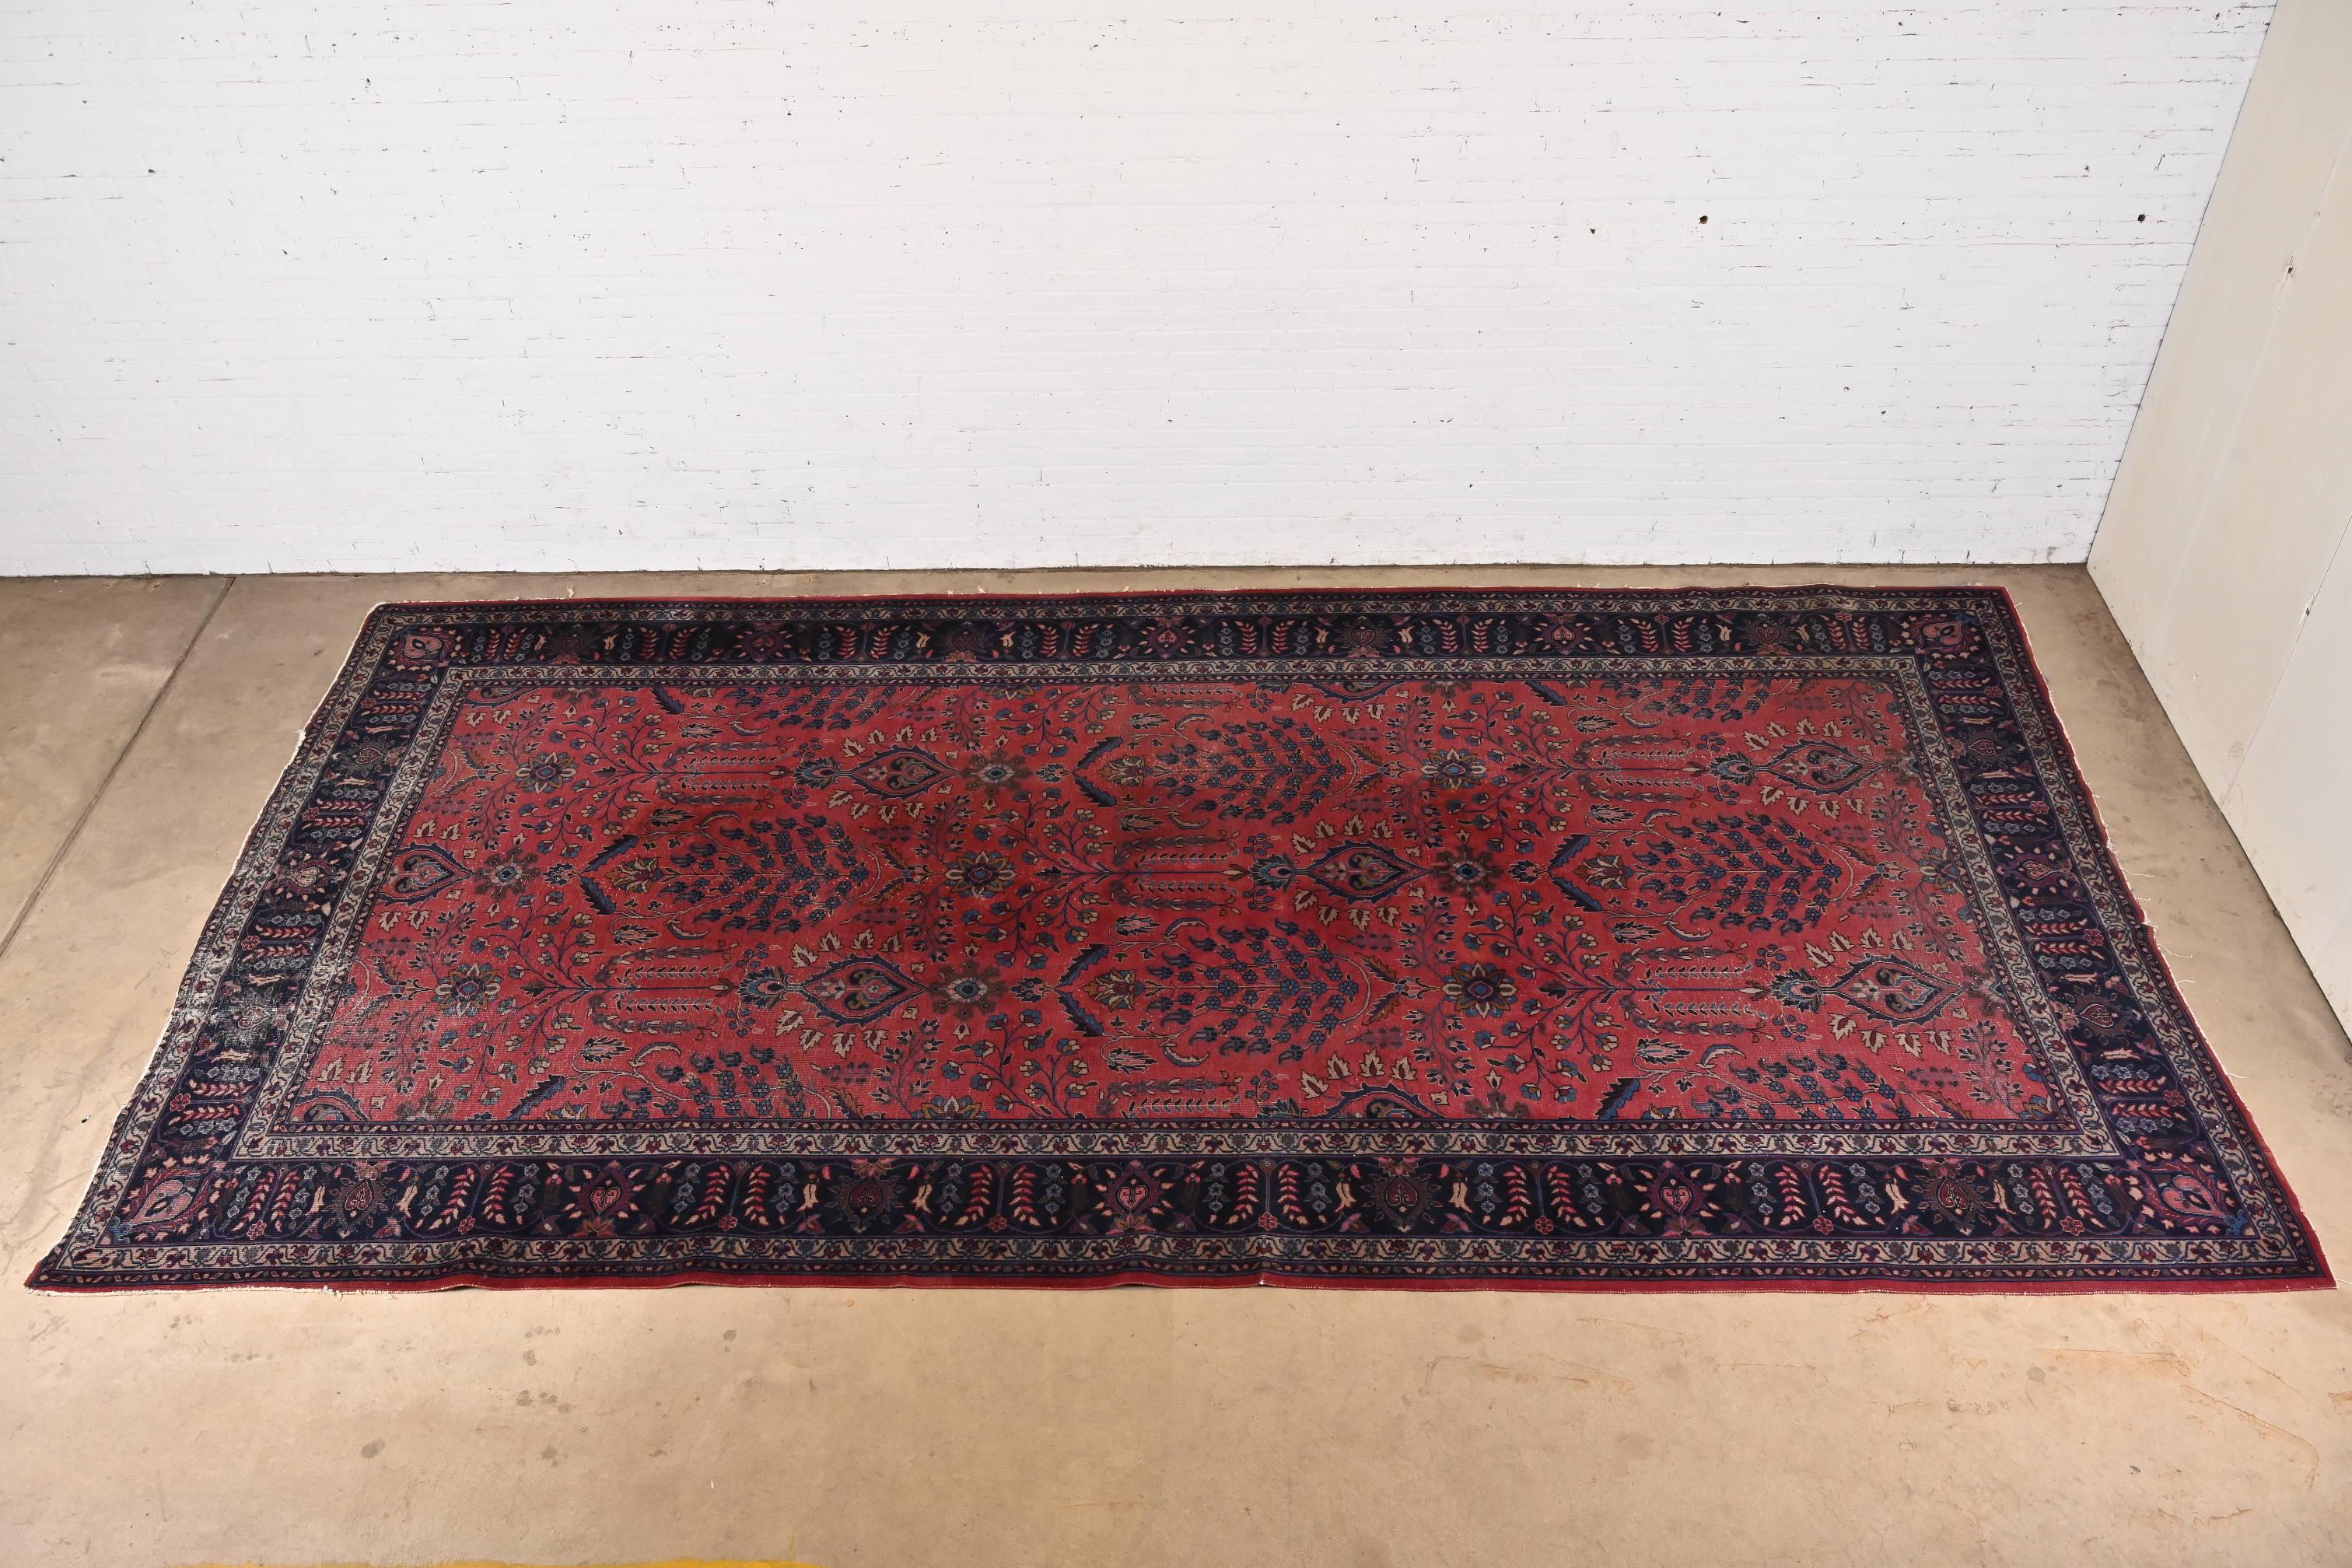 A gorgeous vintage hand-knotted Persian Sarouk room size rug

Circa 1940s

Classic floral design, with predominant colors in red, blue, and ivory.

Measures: 8'11